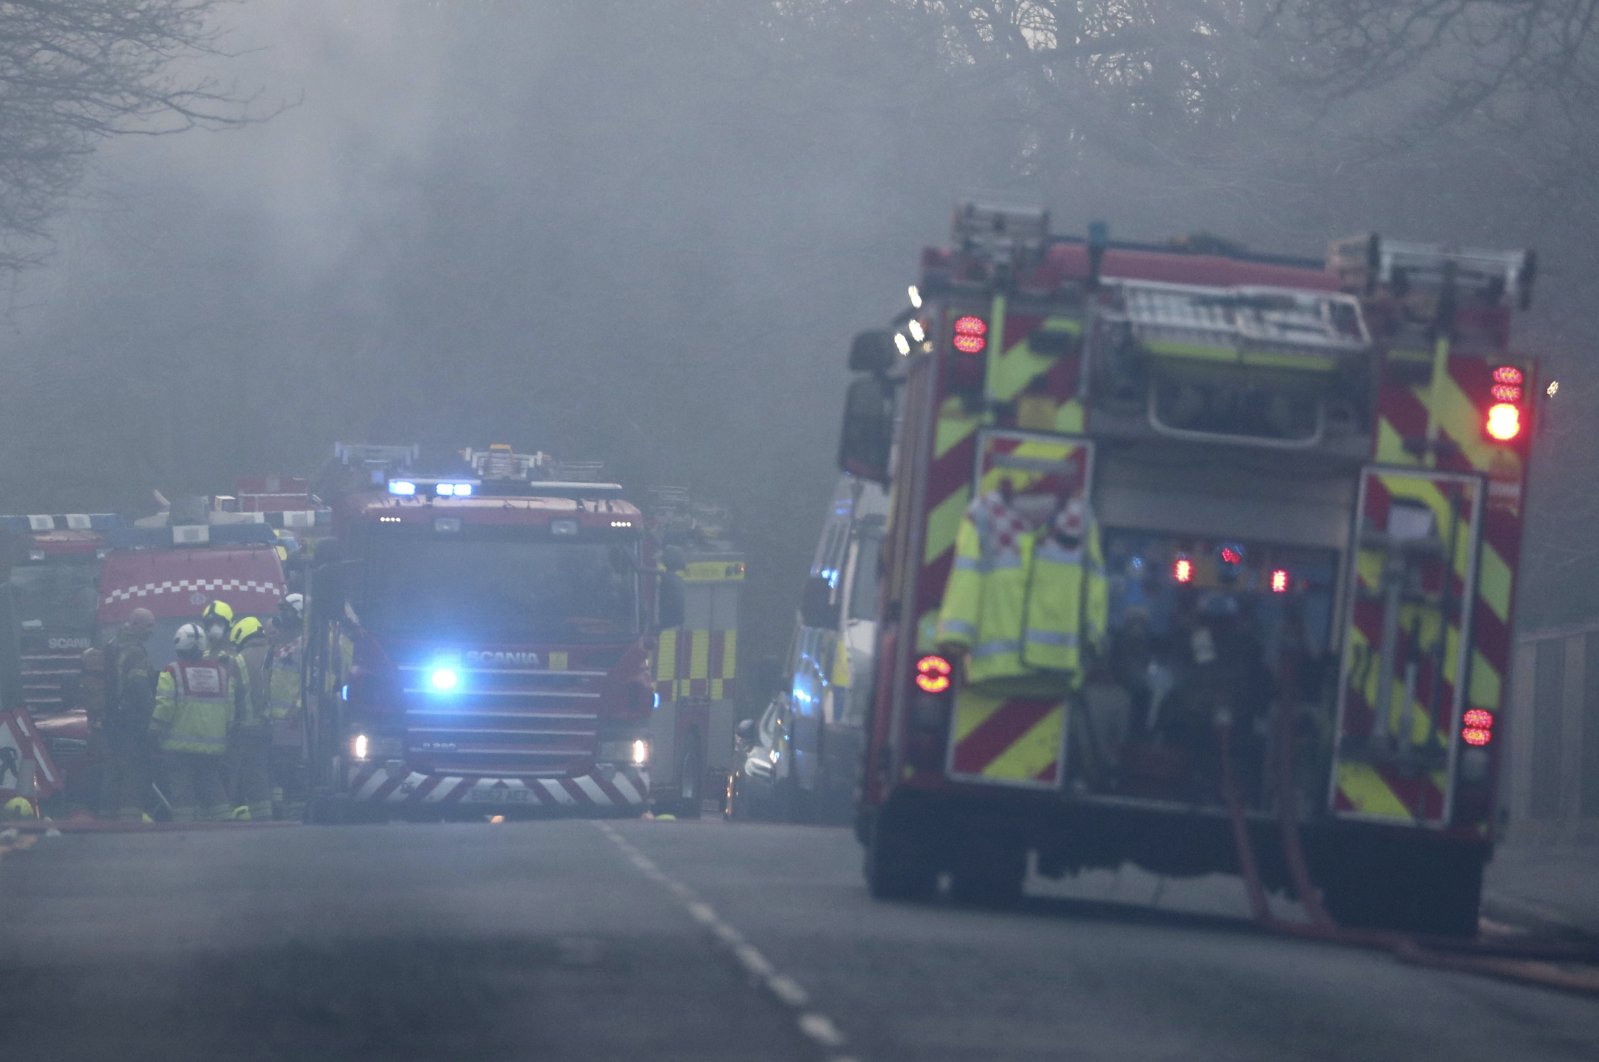 Emergency services responding to a fire that broke out at Napier Barracks where asylum seekers are housed in Folkestone, southern England, Friday Jan. 29, 2021.  (Gareth Fuller/PA via AP)